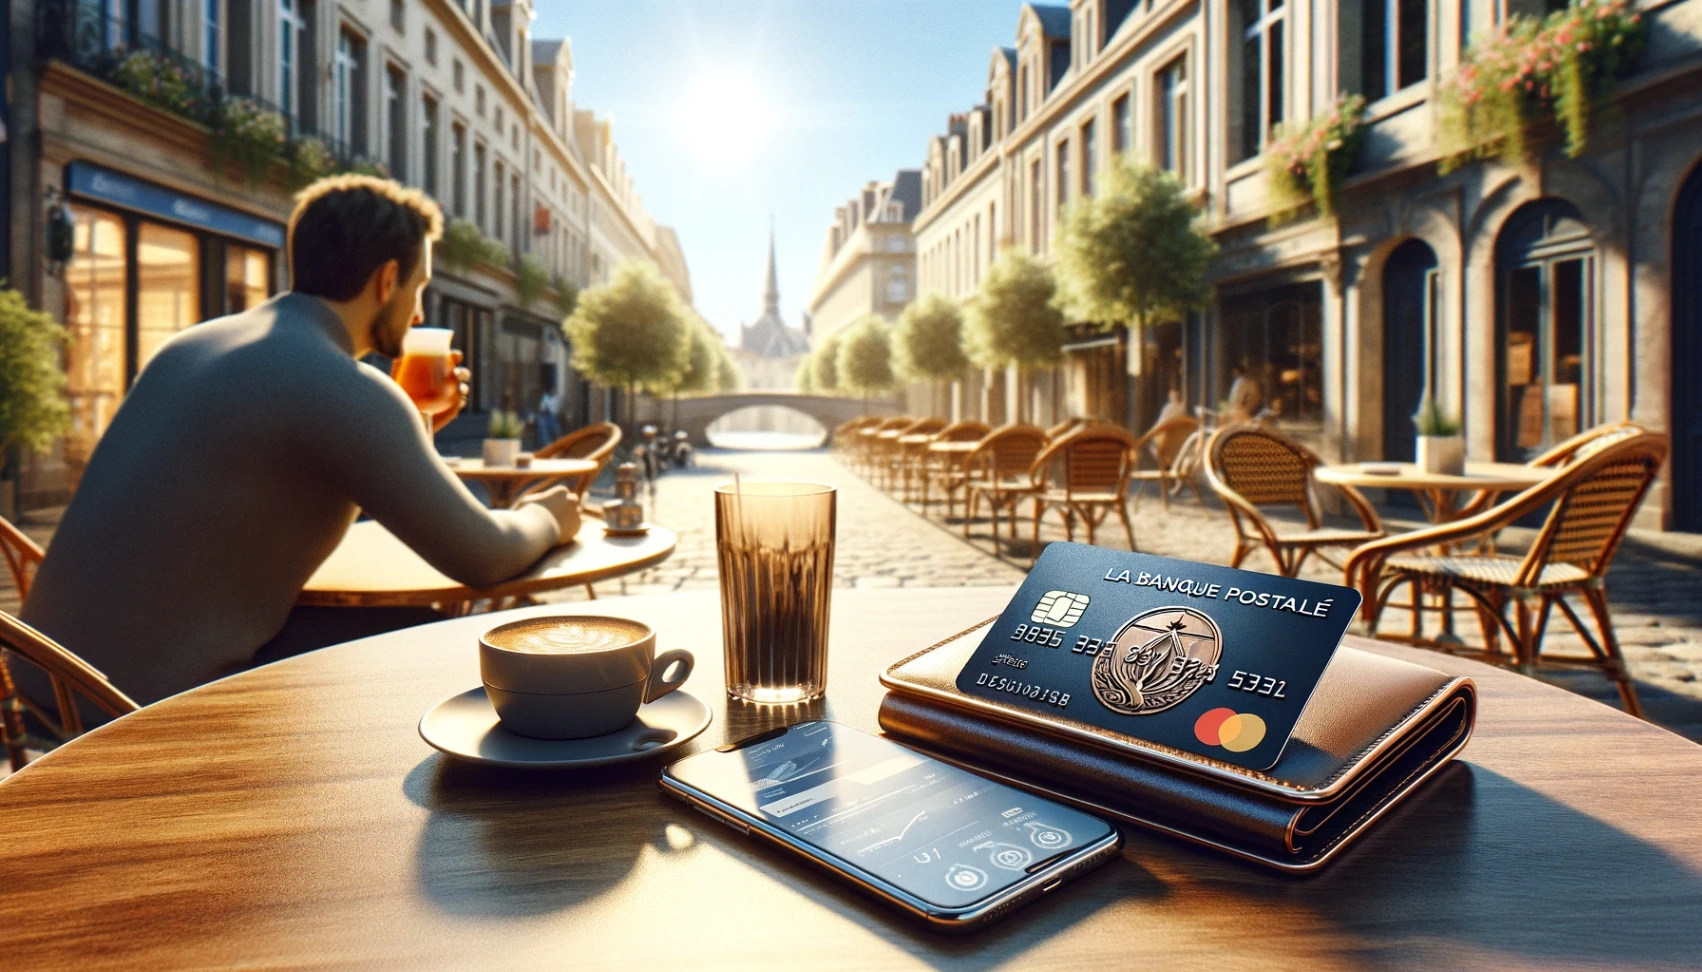 Visa Classic from La Banque Postale: Simplified Online Application Steps 